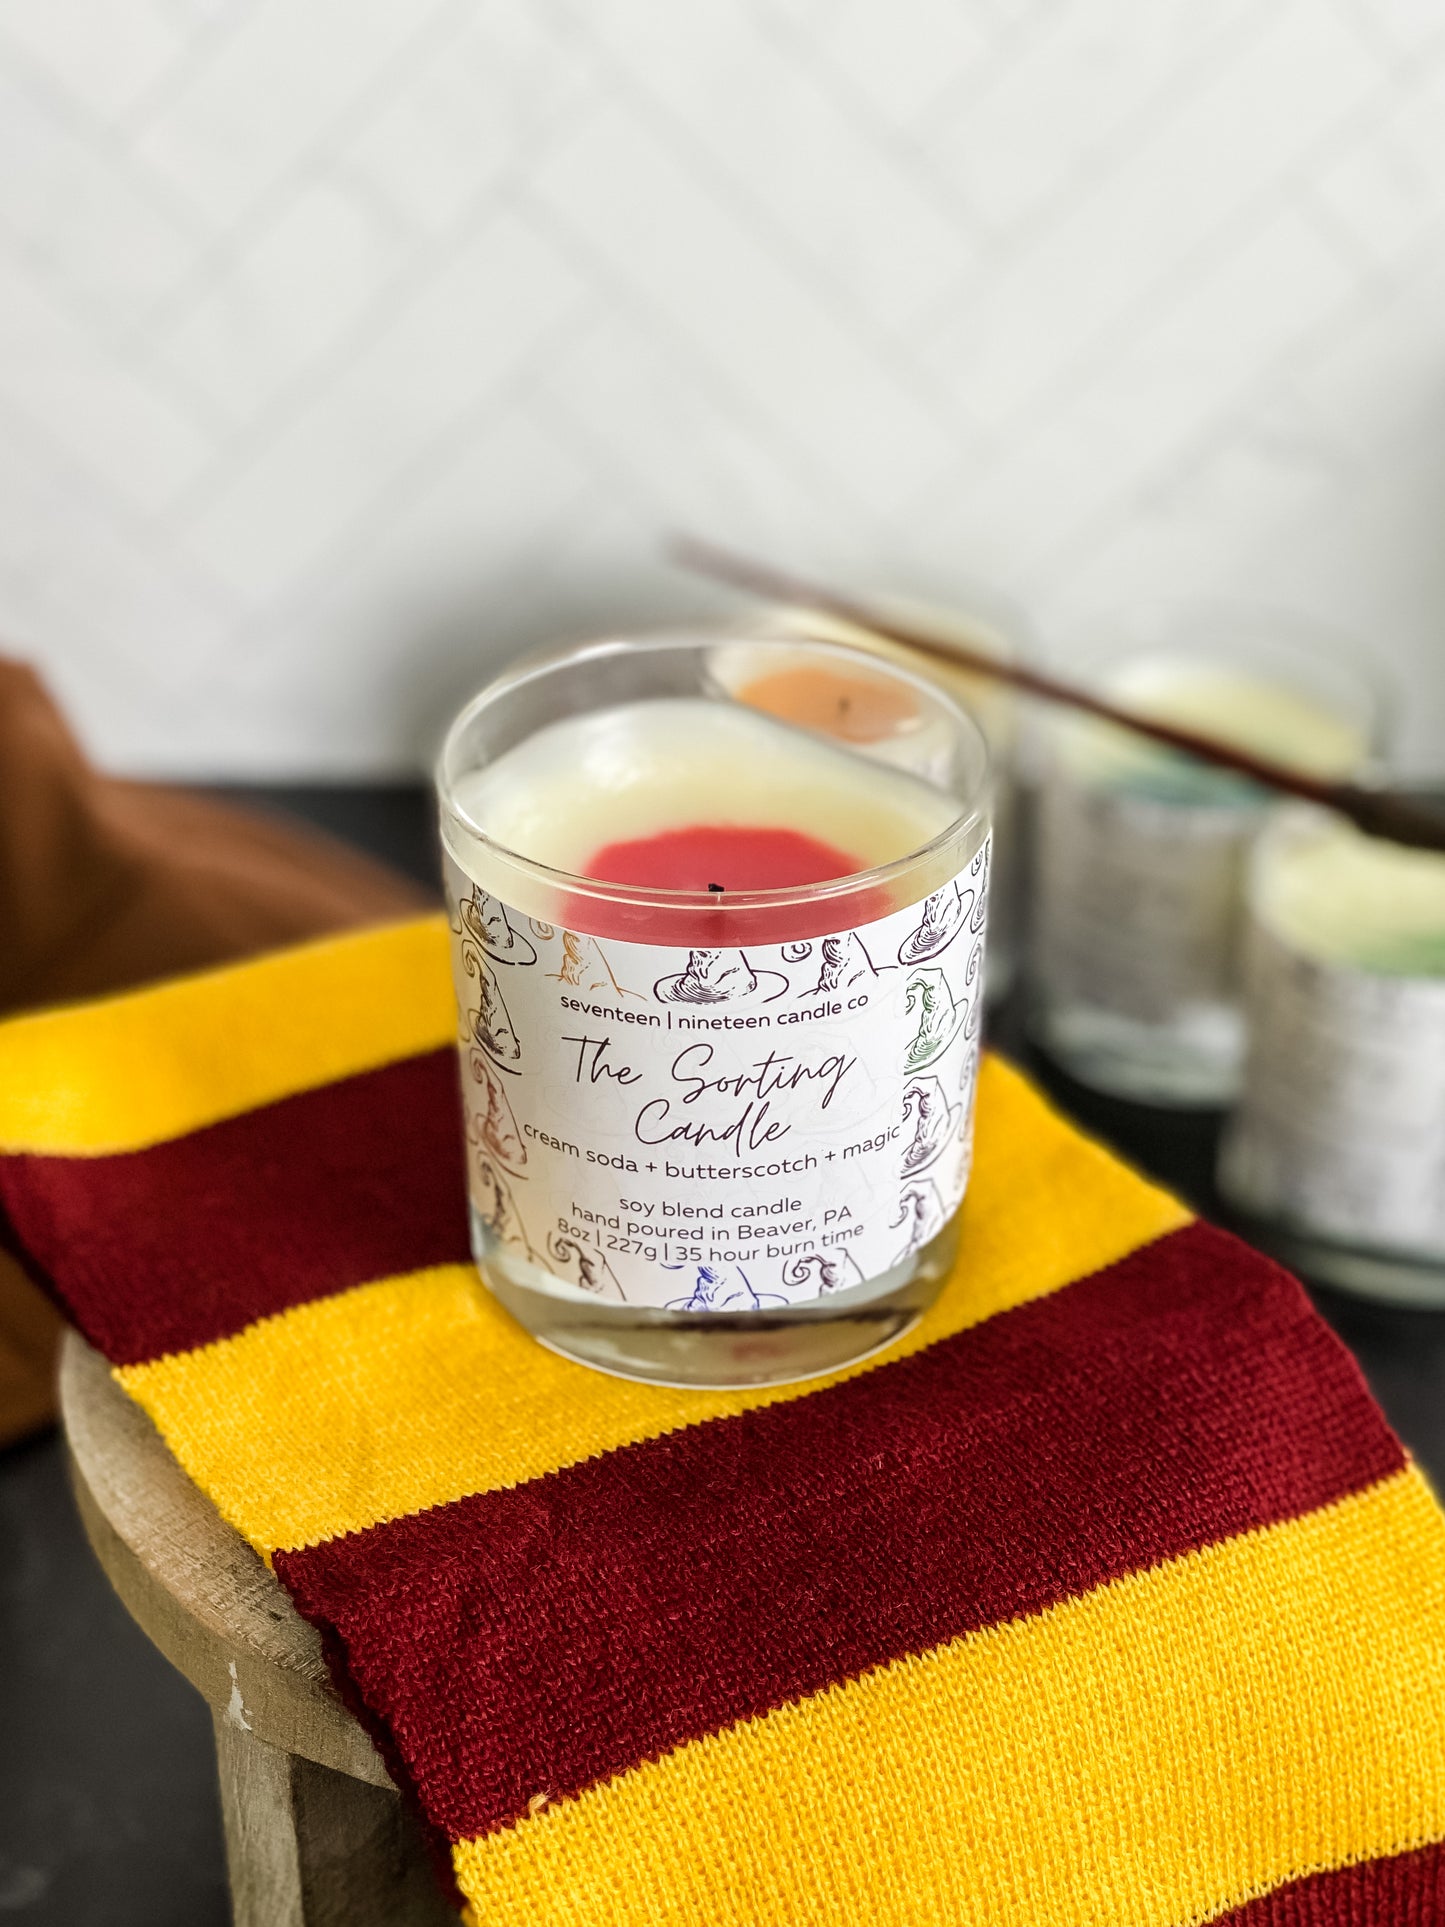 The Sorting Candle